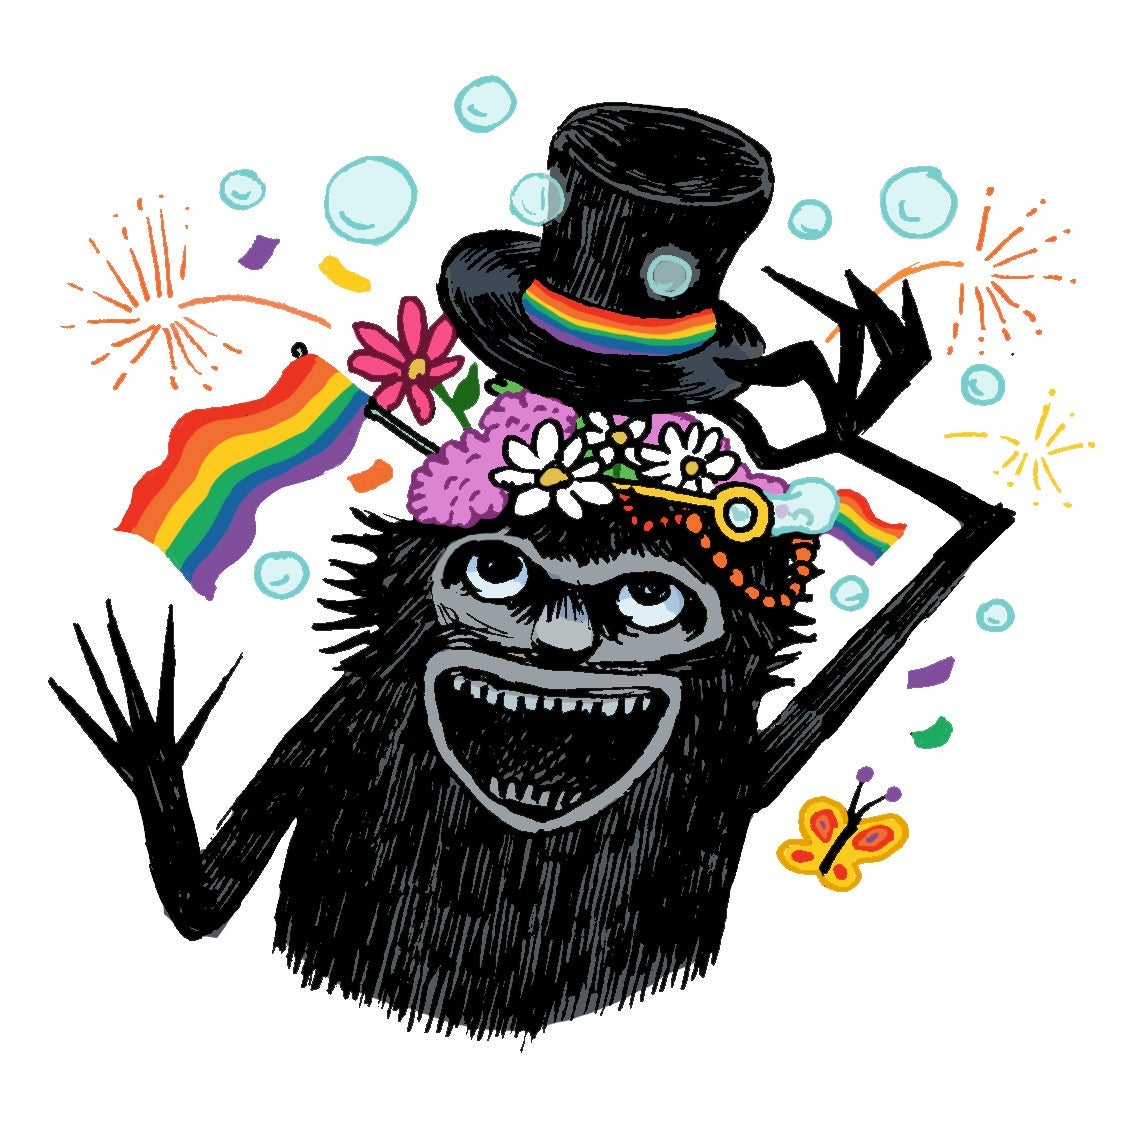 Illustration of the Babadook with rainbows.